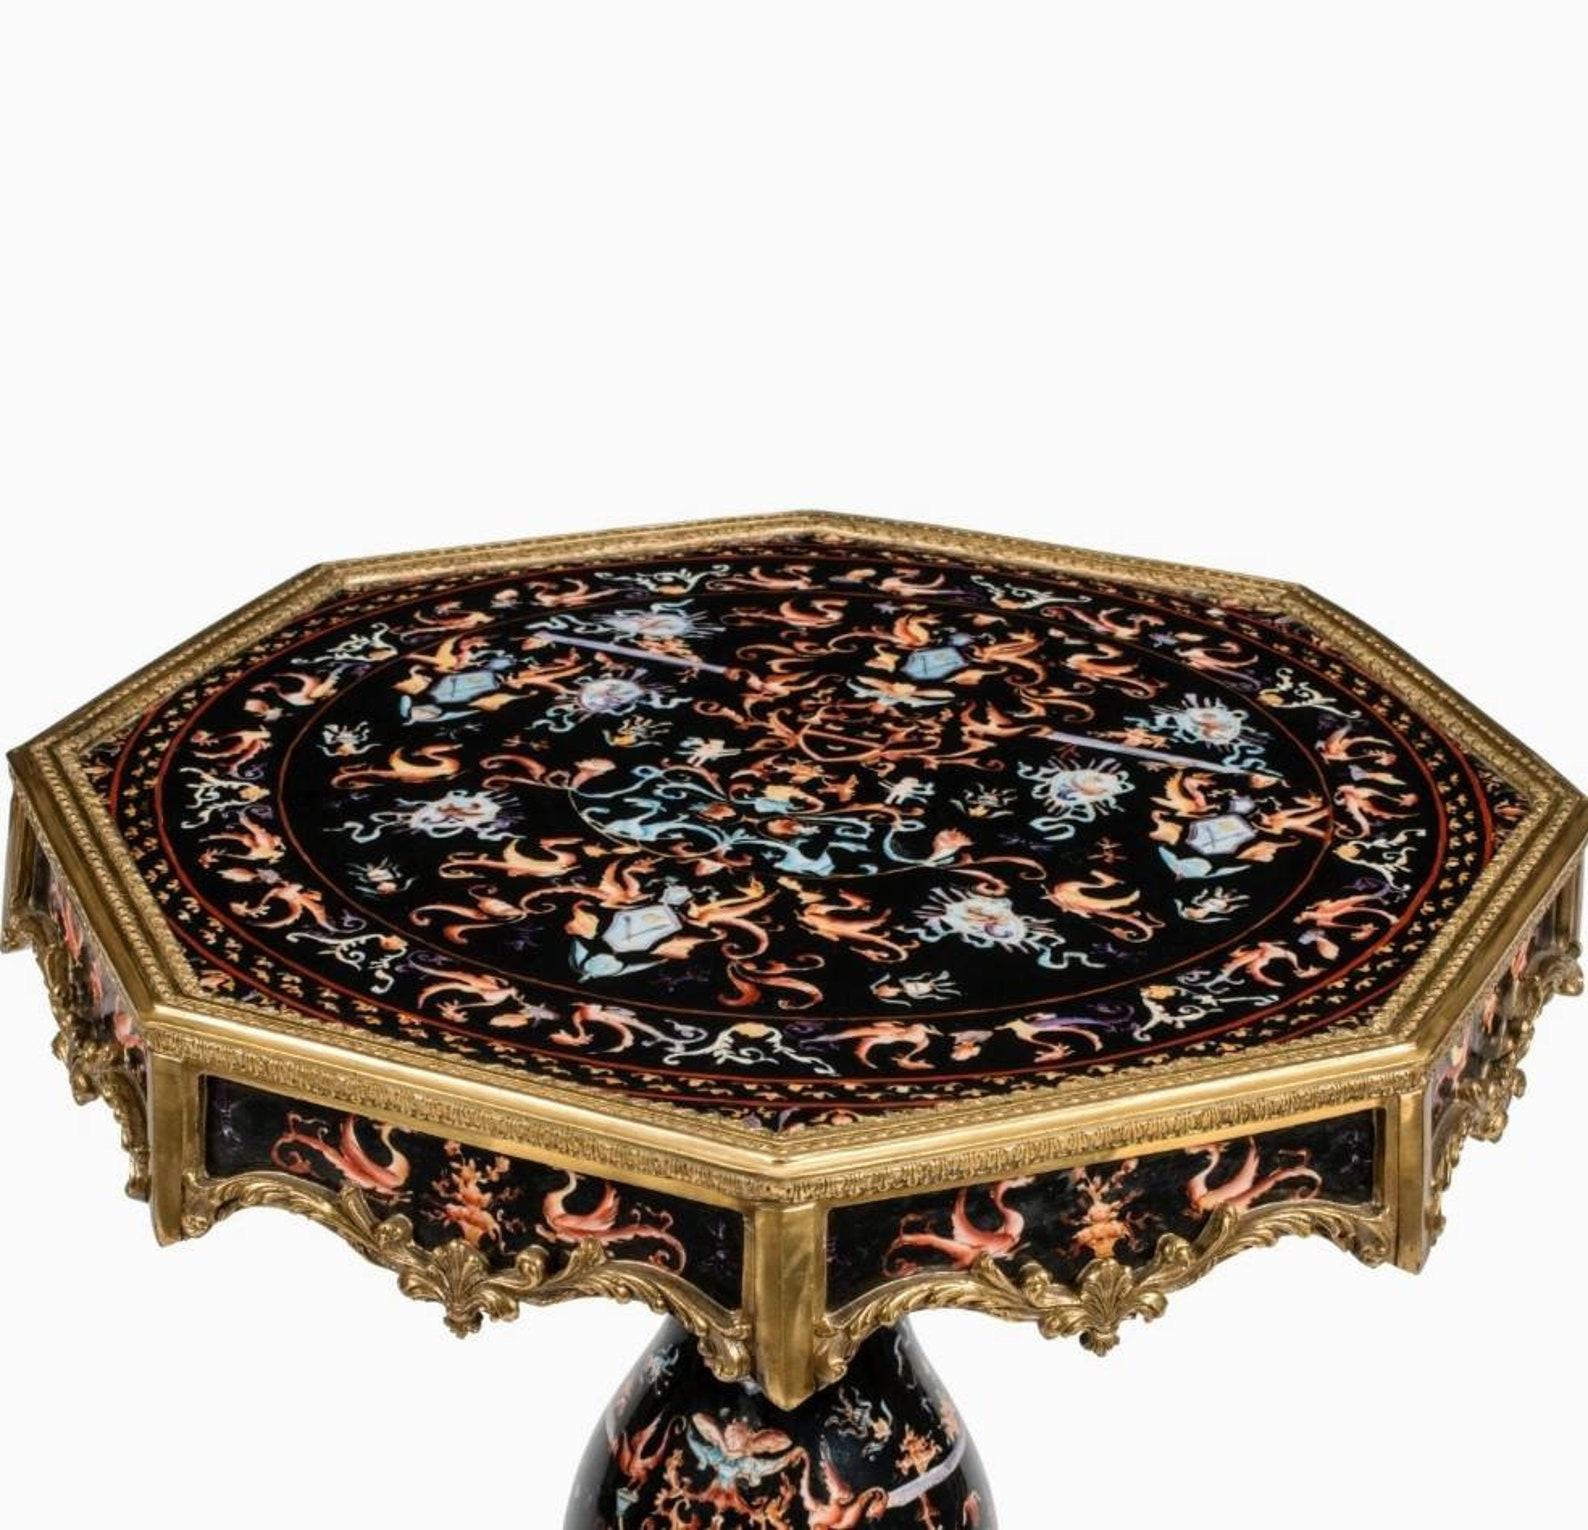 Ebonized Pair of French Baroque Gilt Bronze Mounted Porcelain Side Tables